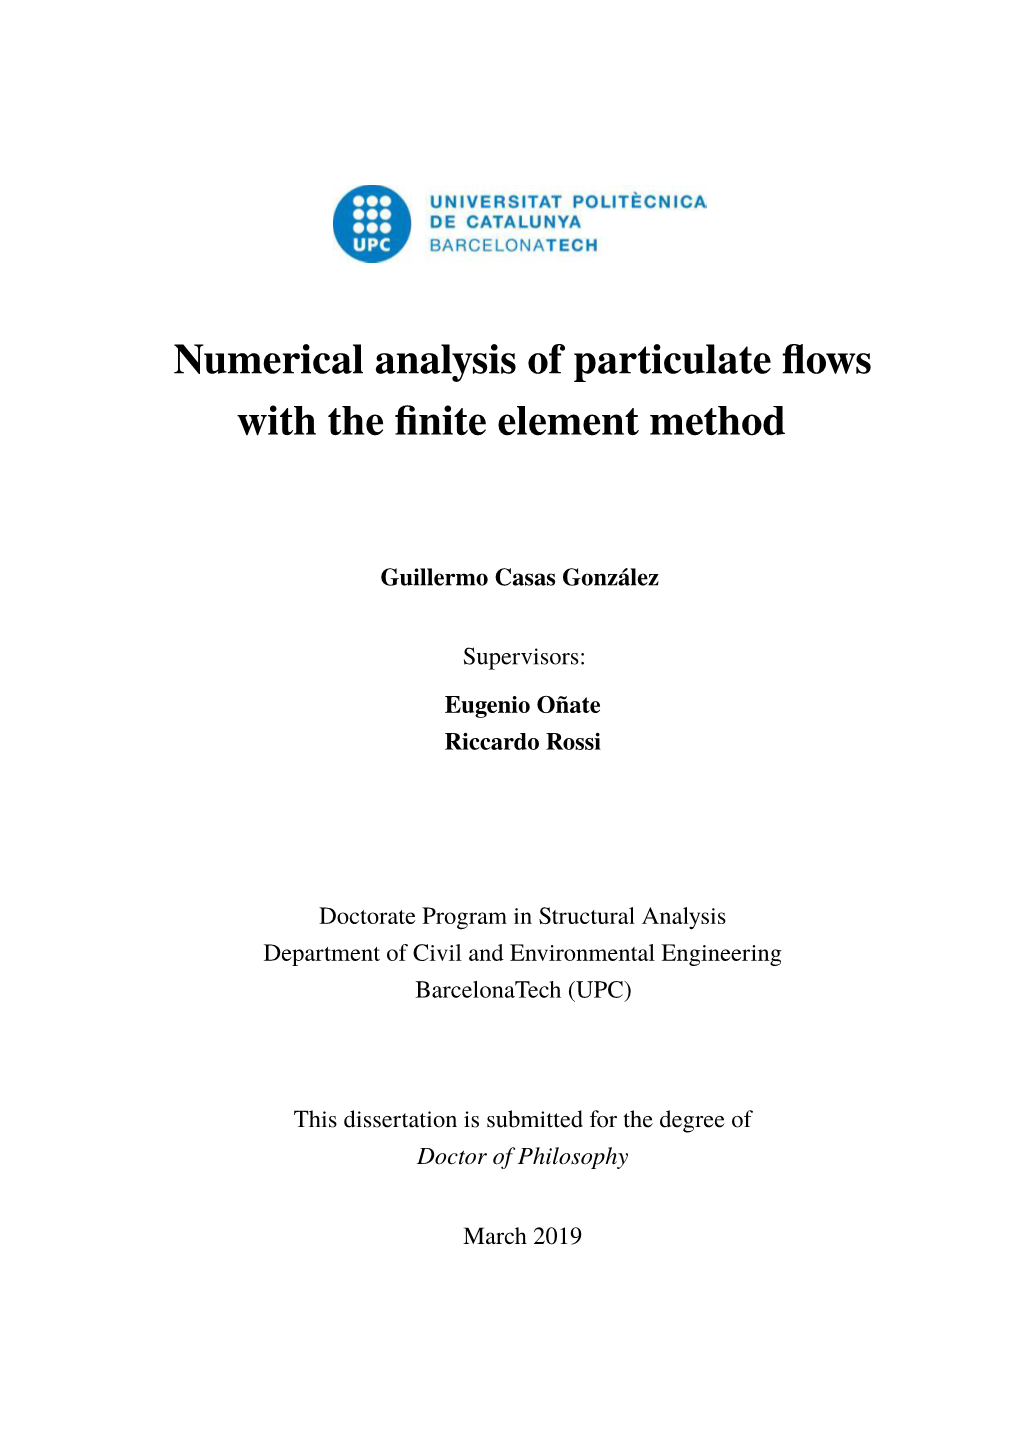 Numerical Analysis of Particulate Flows with the Finite Element Method